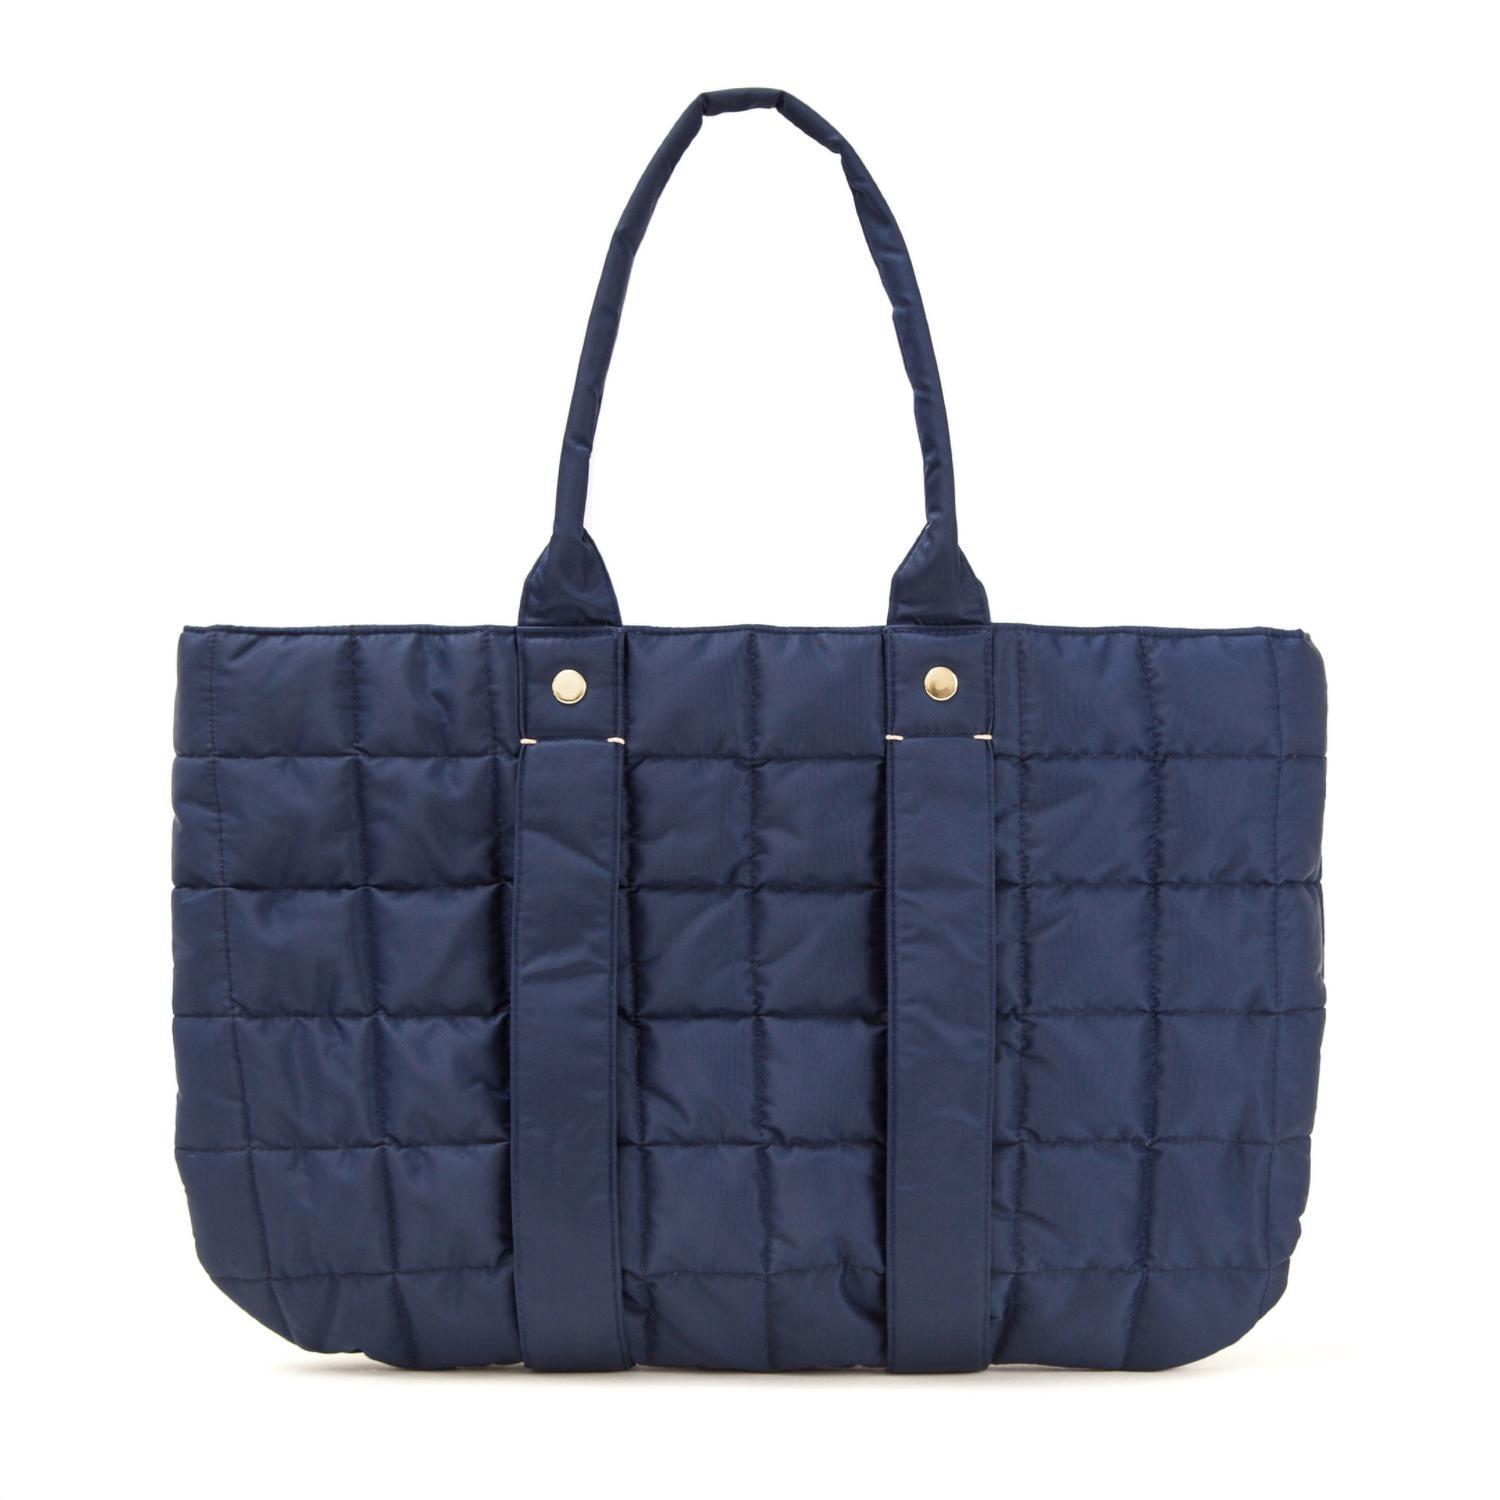 Clare V. Tropezienne Bag in Blue